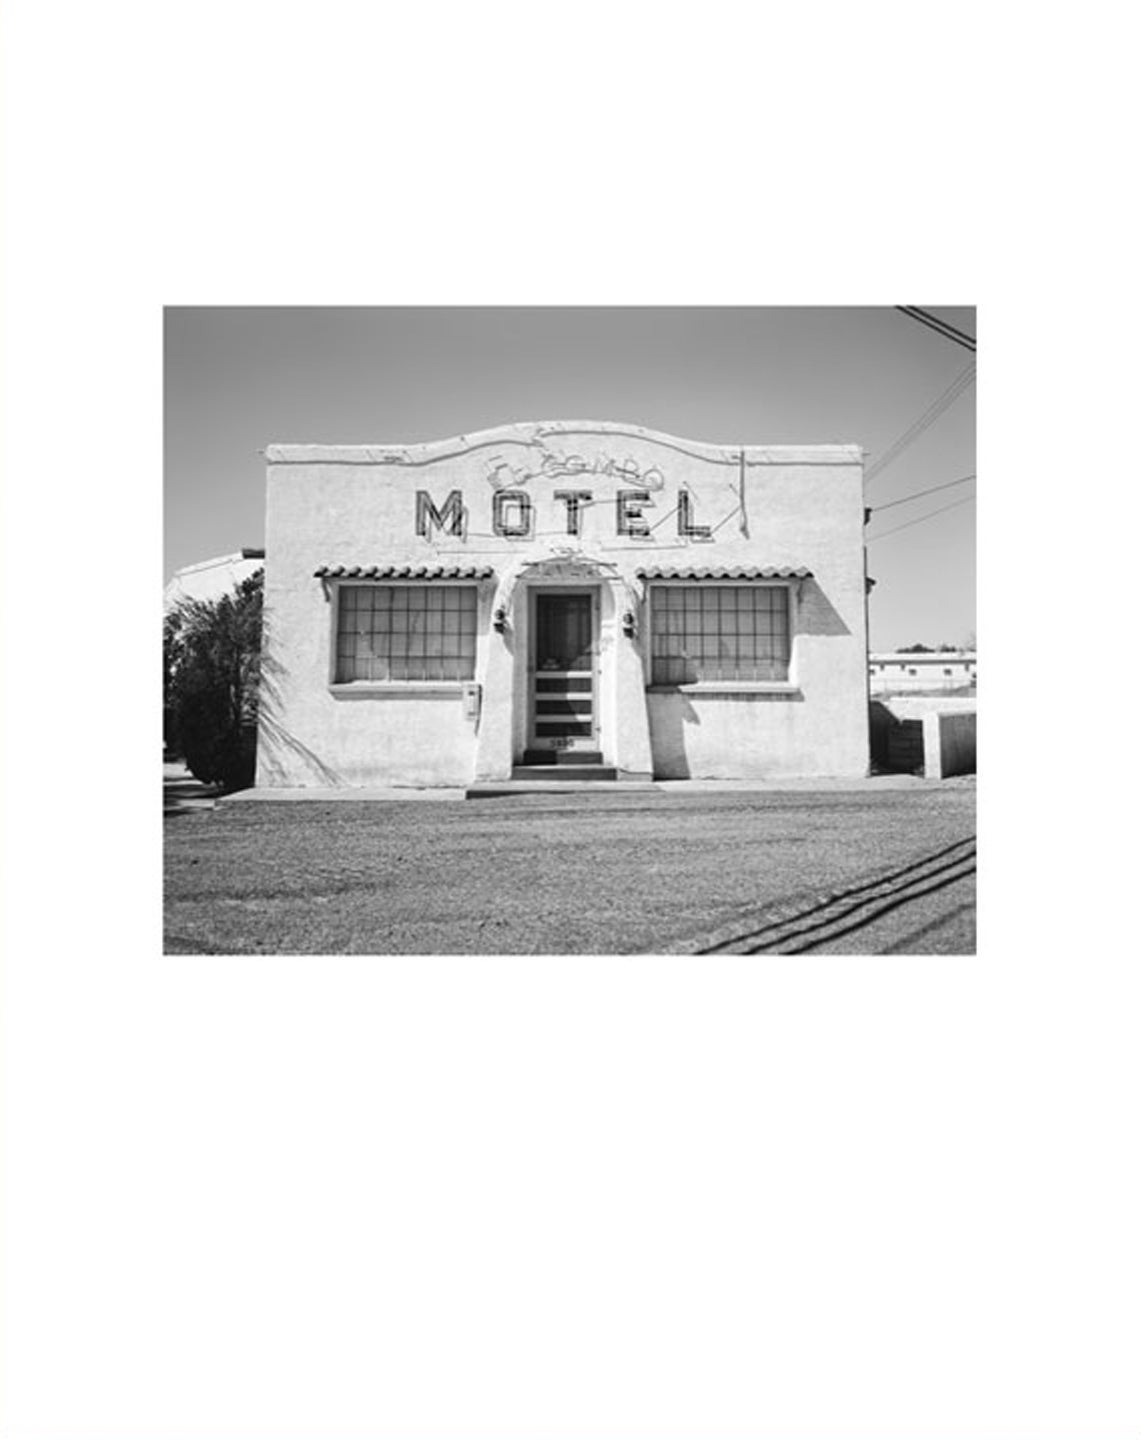 NZ Library #1: John Schott: Route 66, Special Limited Edition (with Gelatin Silver Contact Print "Untitled" from the Series "Route 66 Motels," El Pueblo Court Motel Office with Pay Telephone) (NZ Library - Set One, Volume Six)